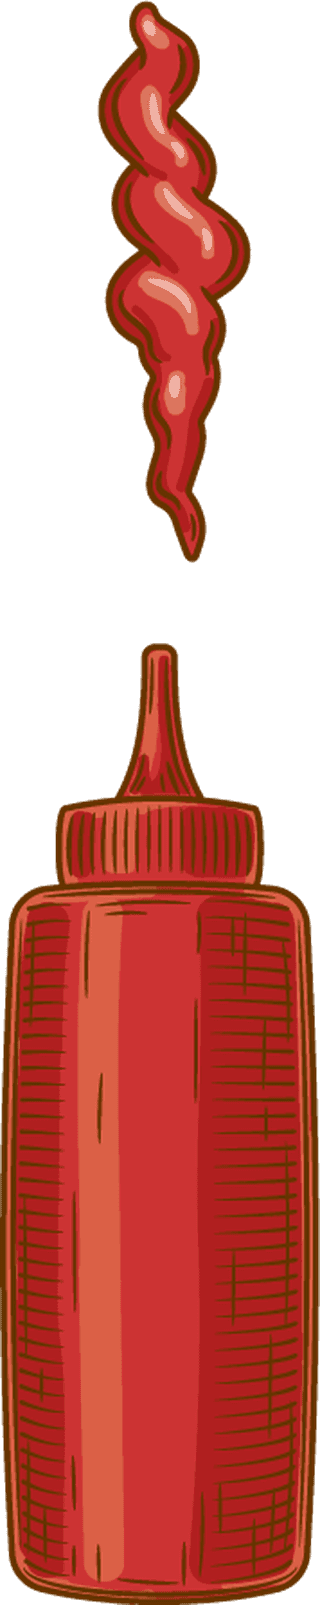 vectorillustration-engraving-style-different-sauces-are-poured-from-bottles-727209